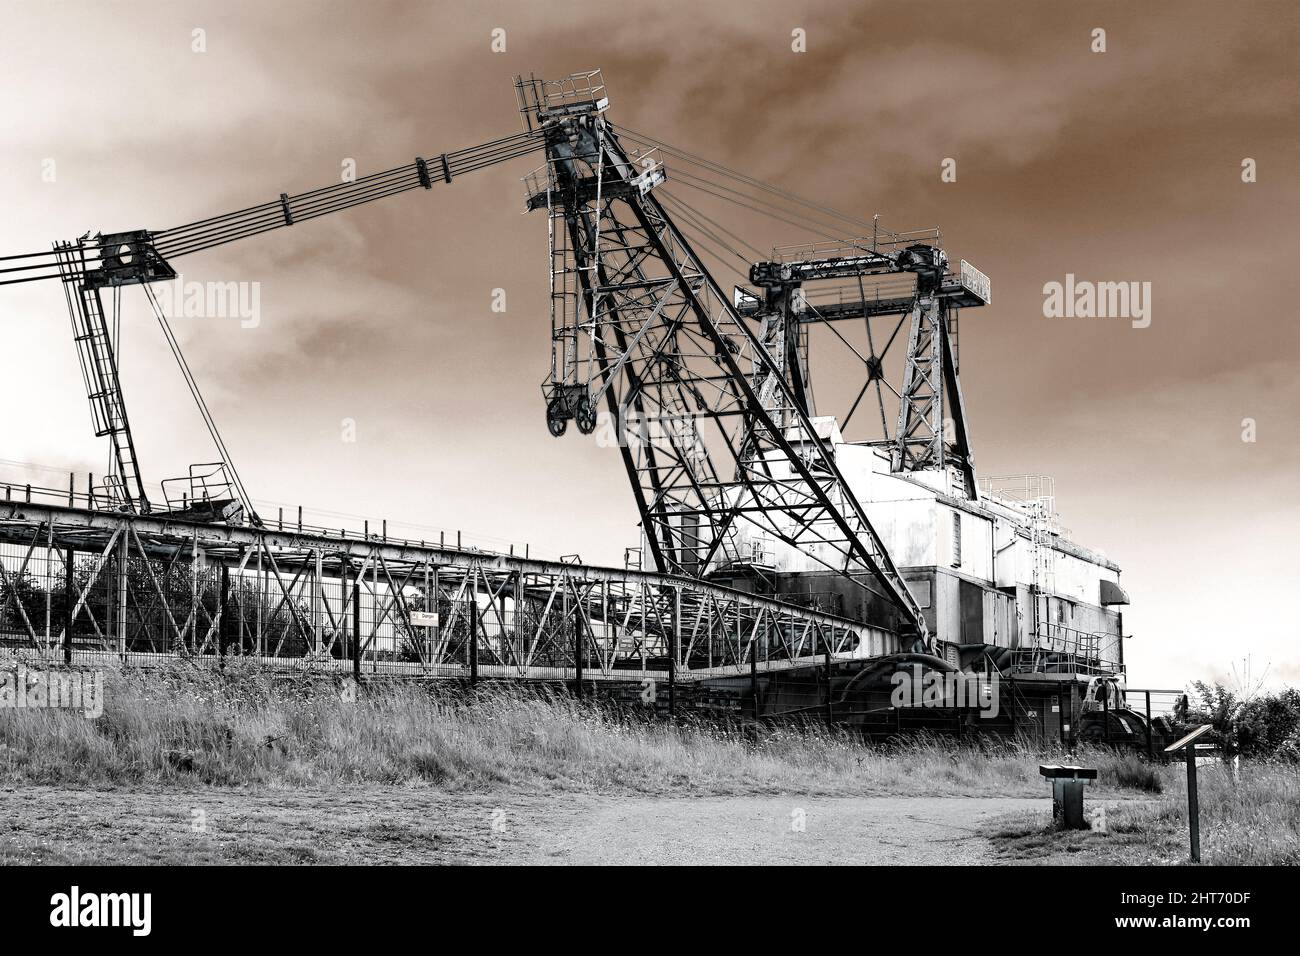 'Oddball', a Bucyrus Erie BE 1150 Walking Dragline Excavator, which was used in opencast/surface coal mining. Stock Photo